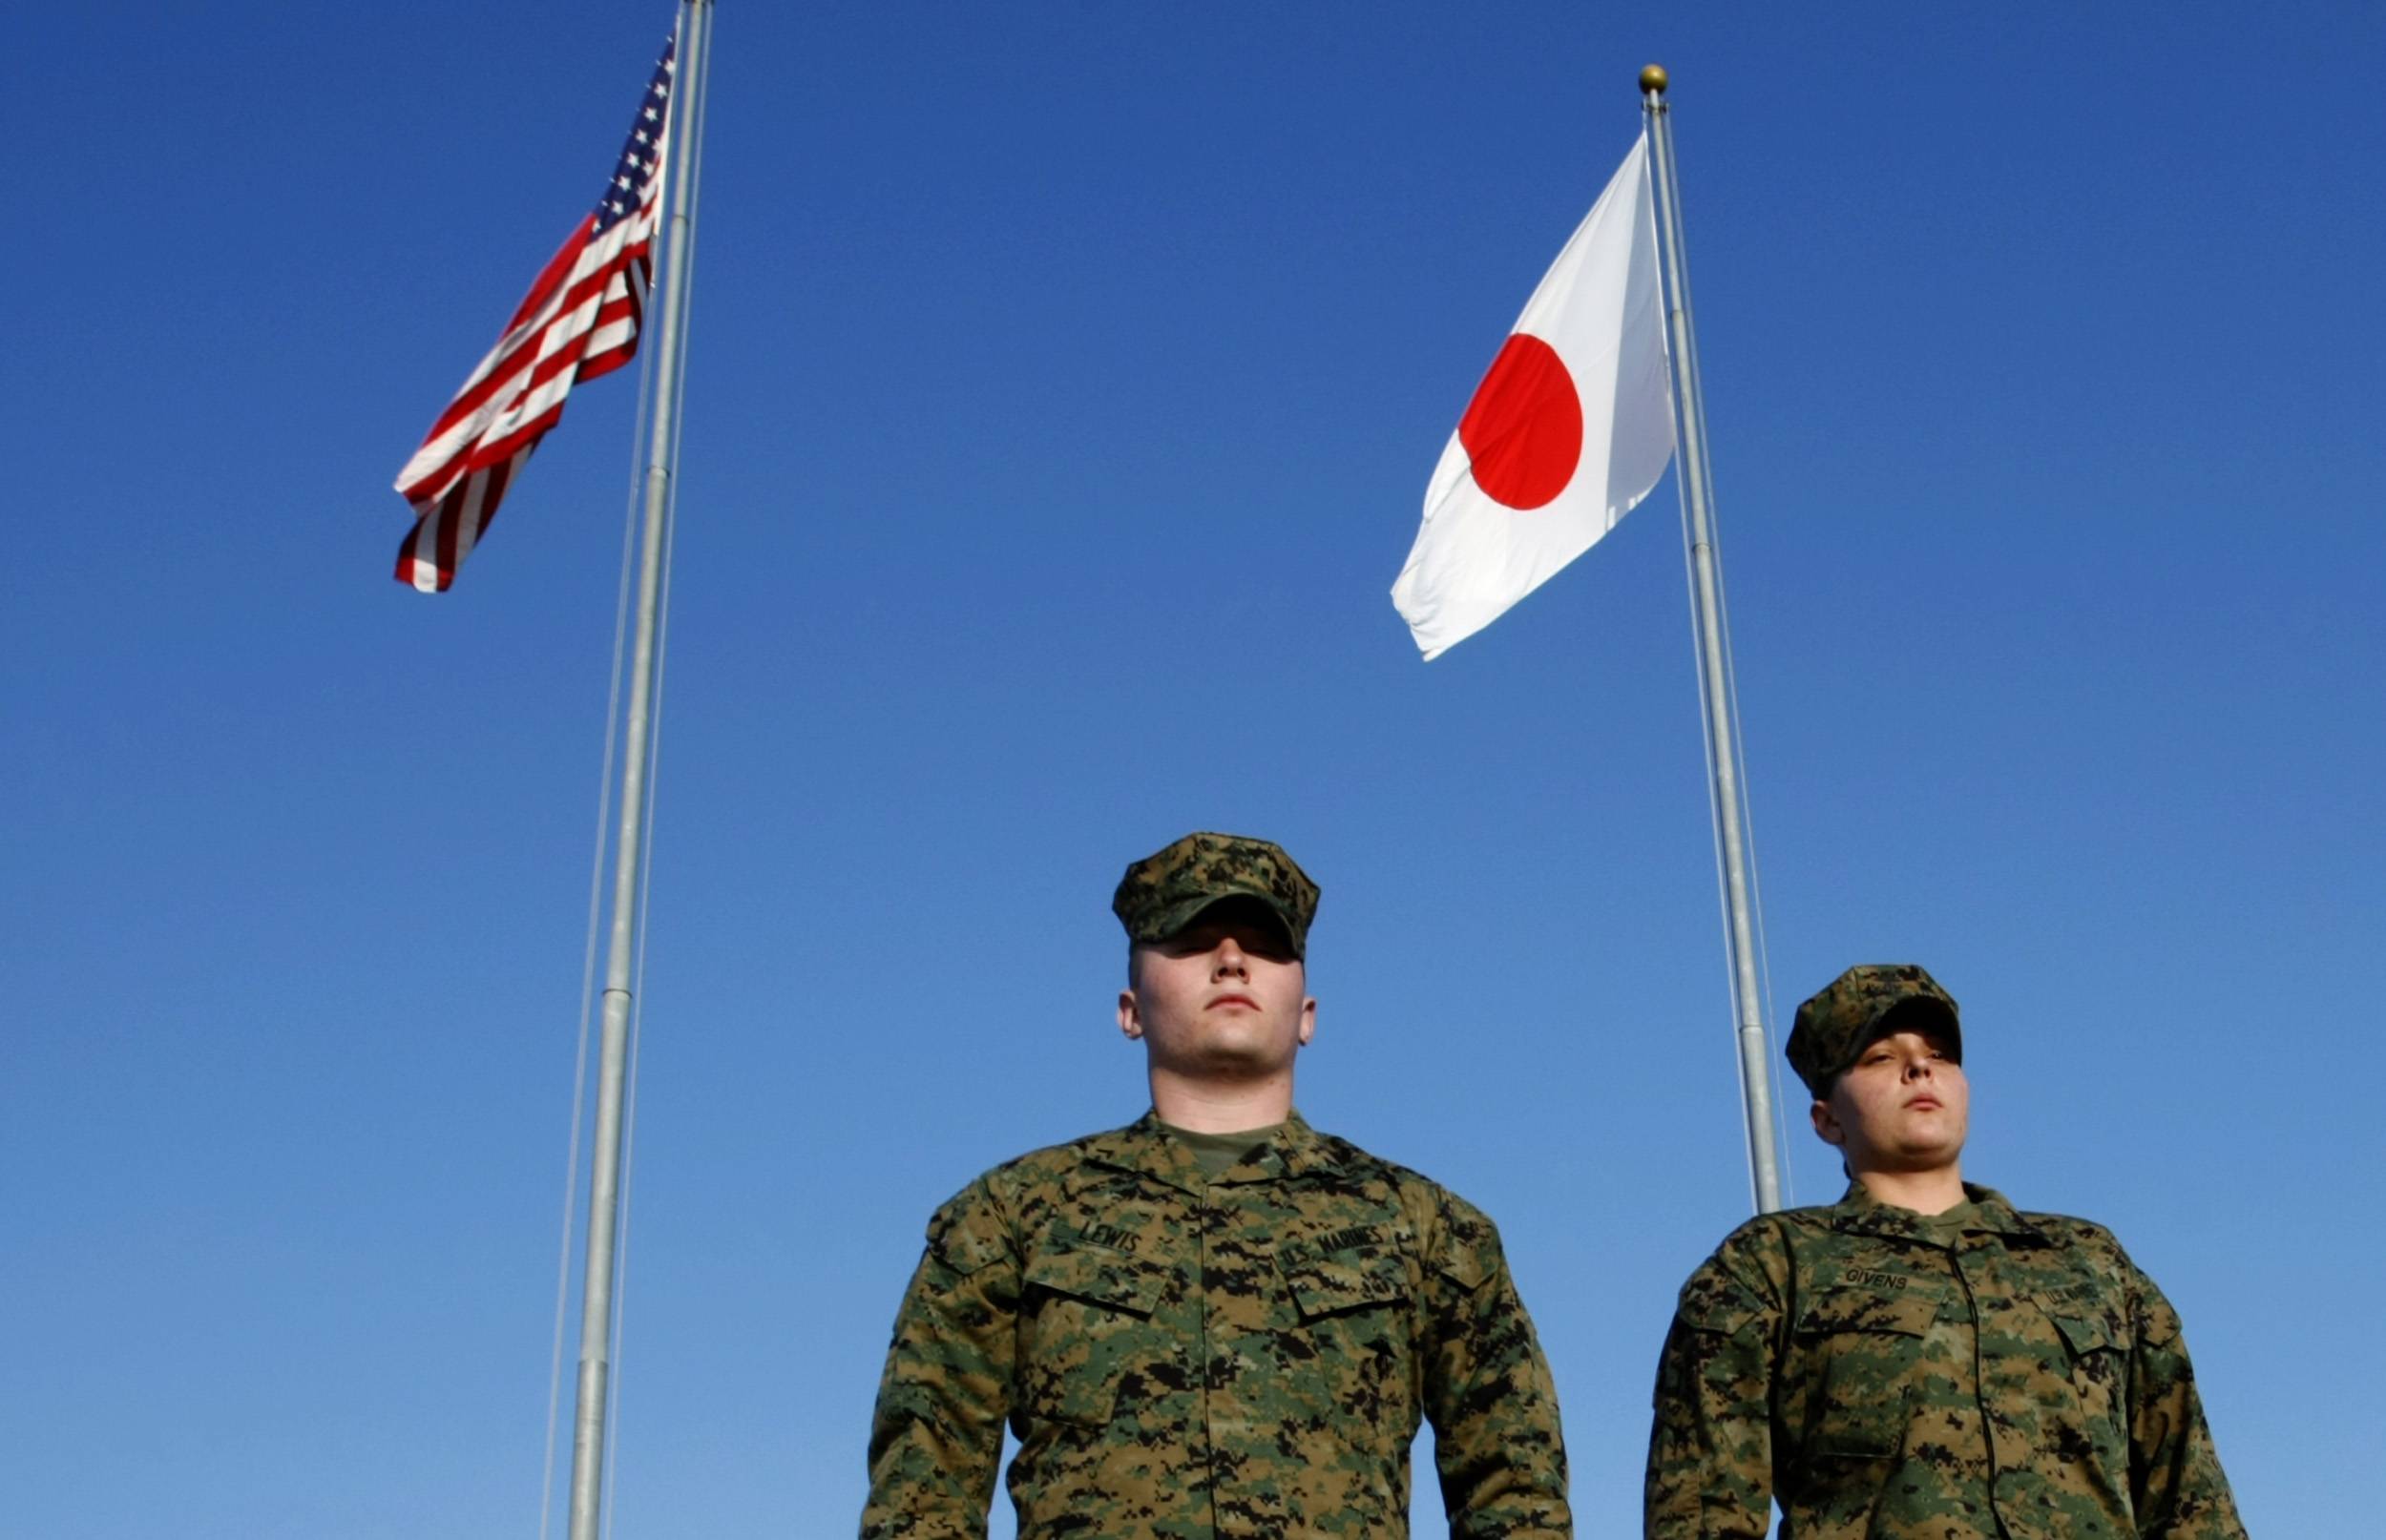 U.S. Marines walk past the U.S. and Japanese national flags at Marine headquarters at Camp Foster in Ginowan, Okinawa, in March 2008. The September 1995 rape of an Okinawan school girl fundamentally changed the fabric of U.S.-Japan-Okinawa relations afterward. | REUTERS 